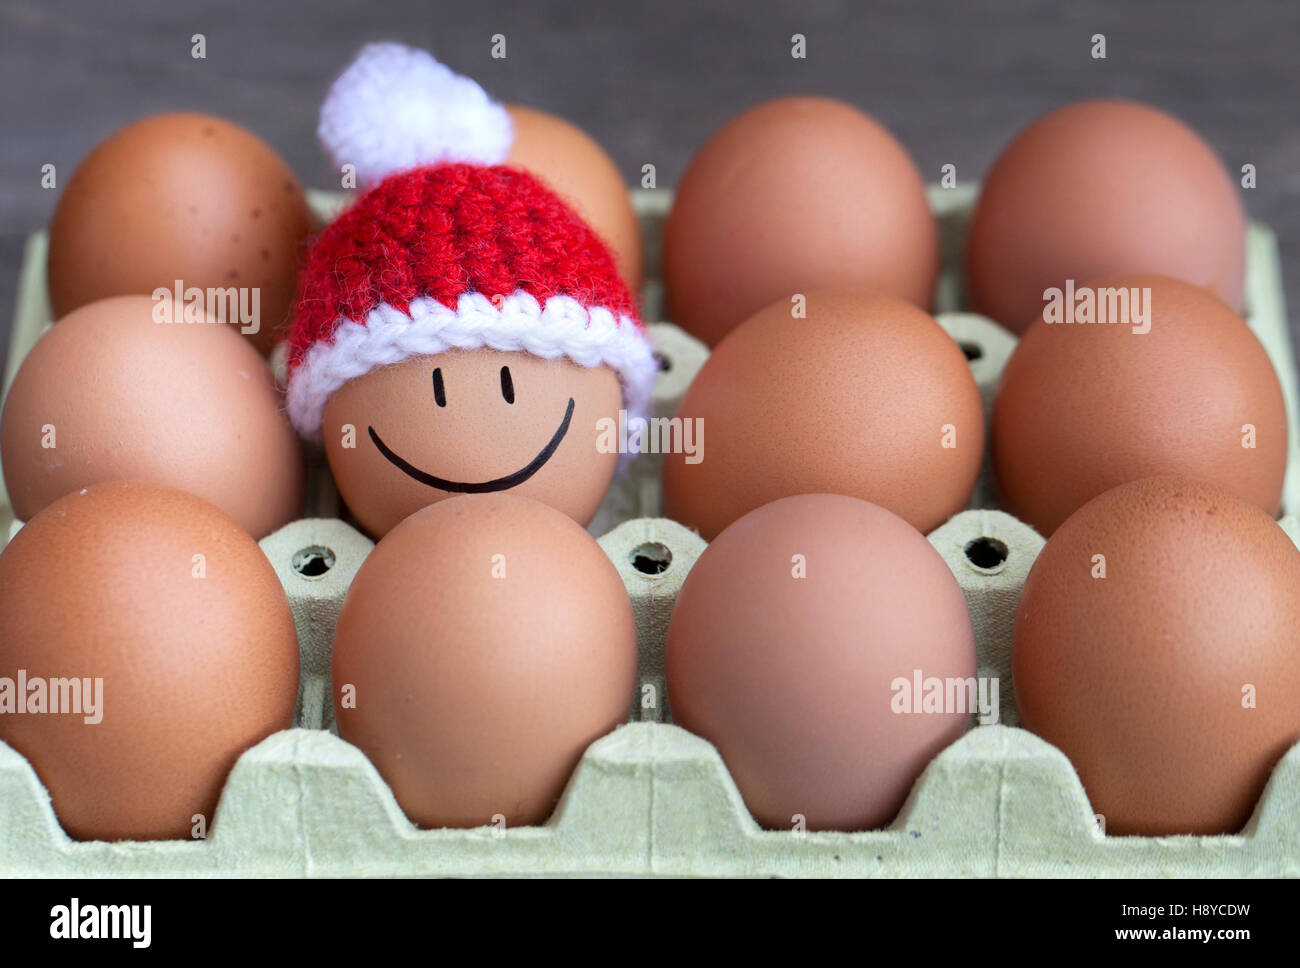 Smiling egg wearing a knitted Santa's hat surrounded by blank brown eggs. Stock Photo